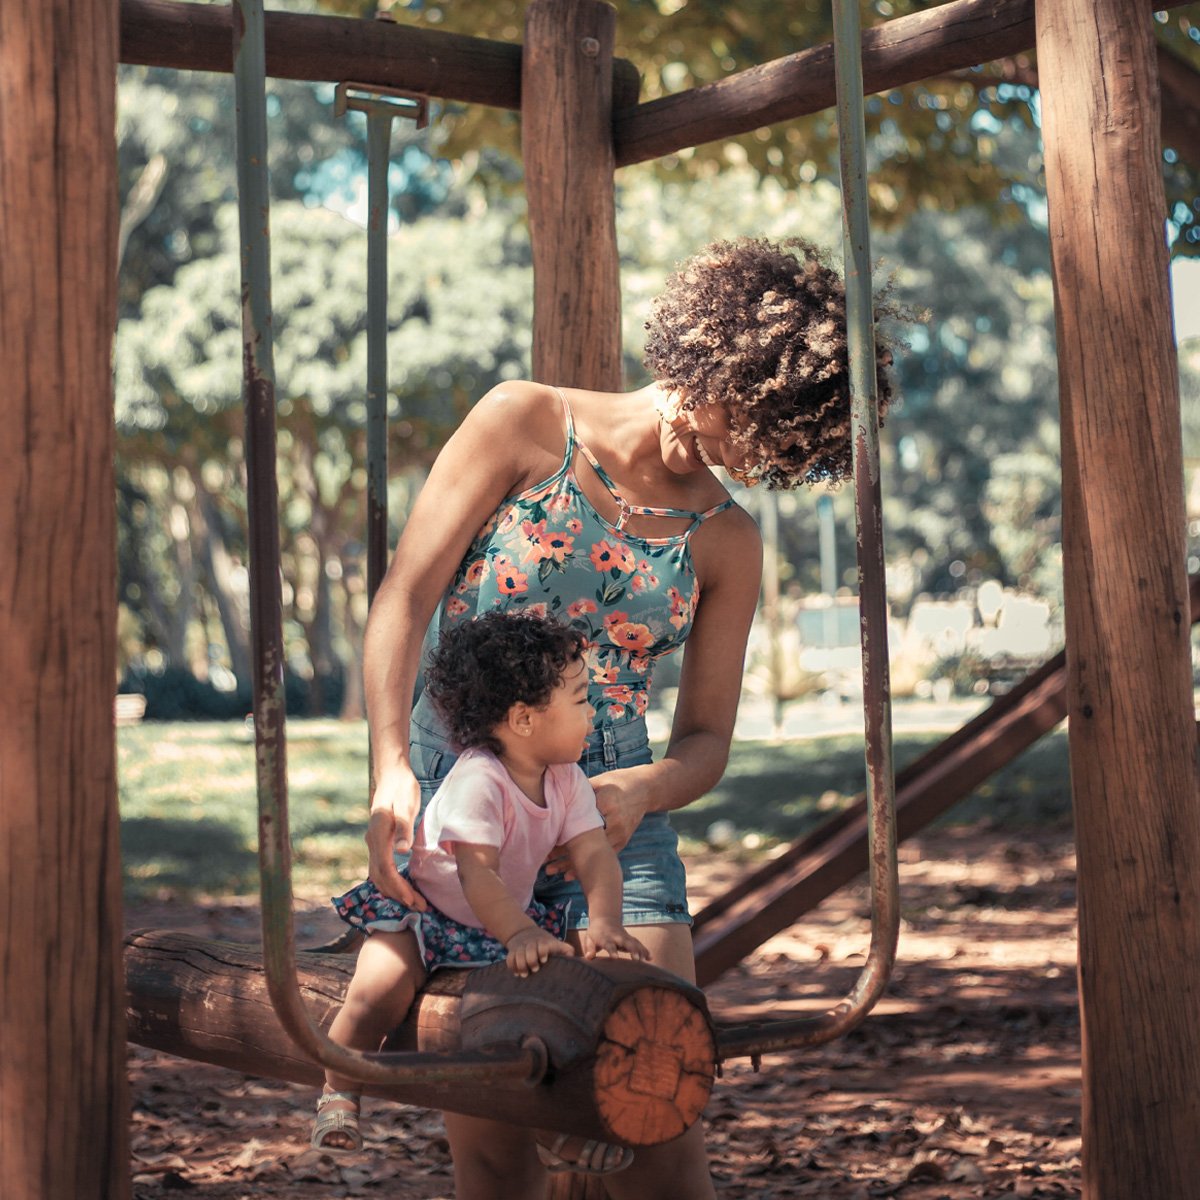 Mother and child playing at the park, connecting with nature.